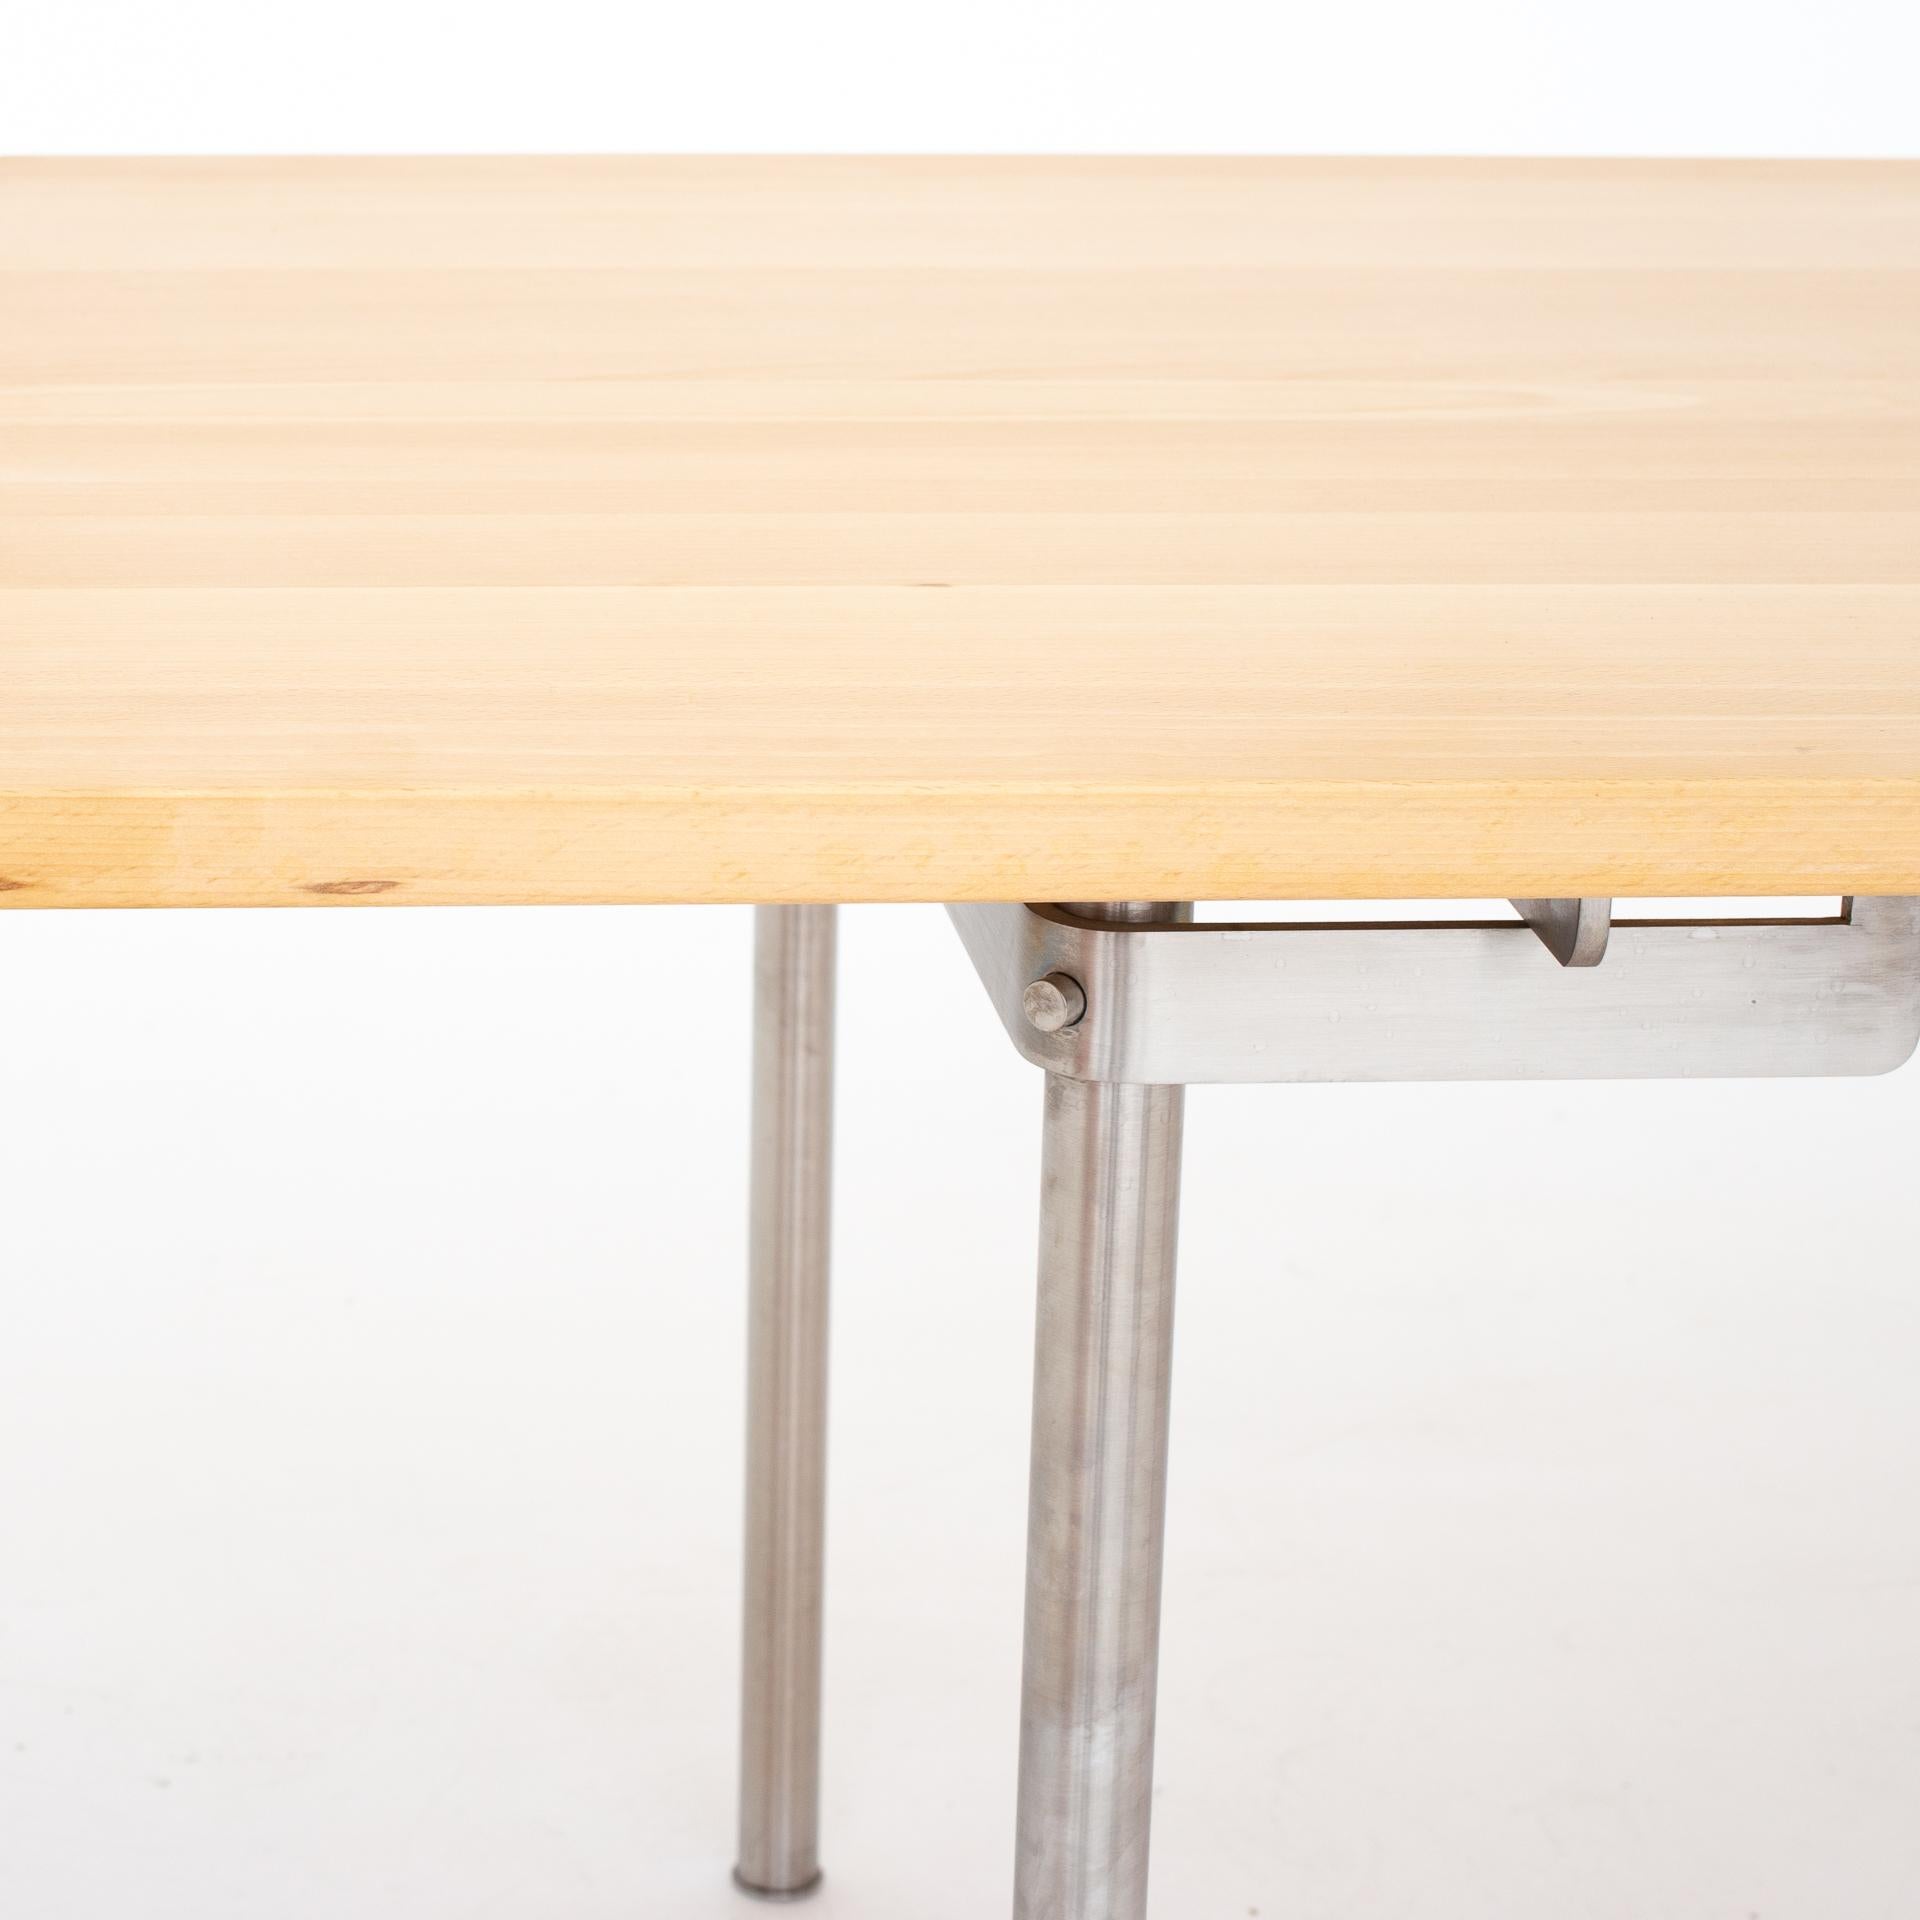 CH 318 - Dining table in solid beech with two black extension leaves. Maker Tranekær furniture.